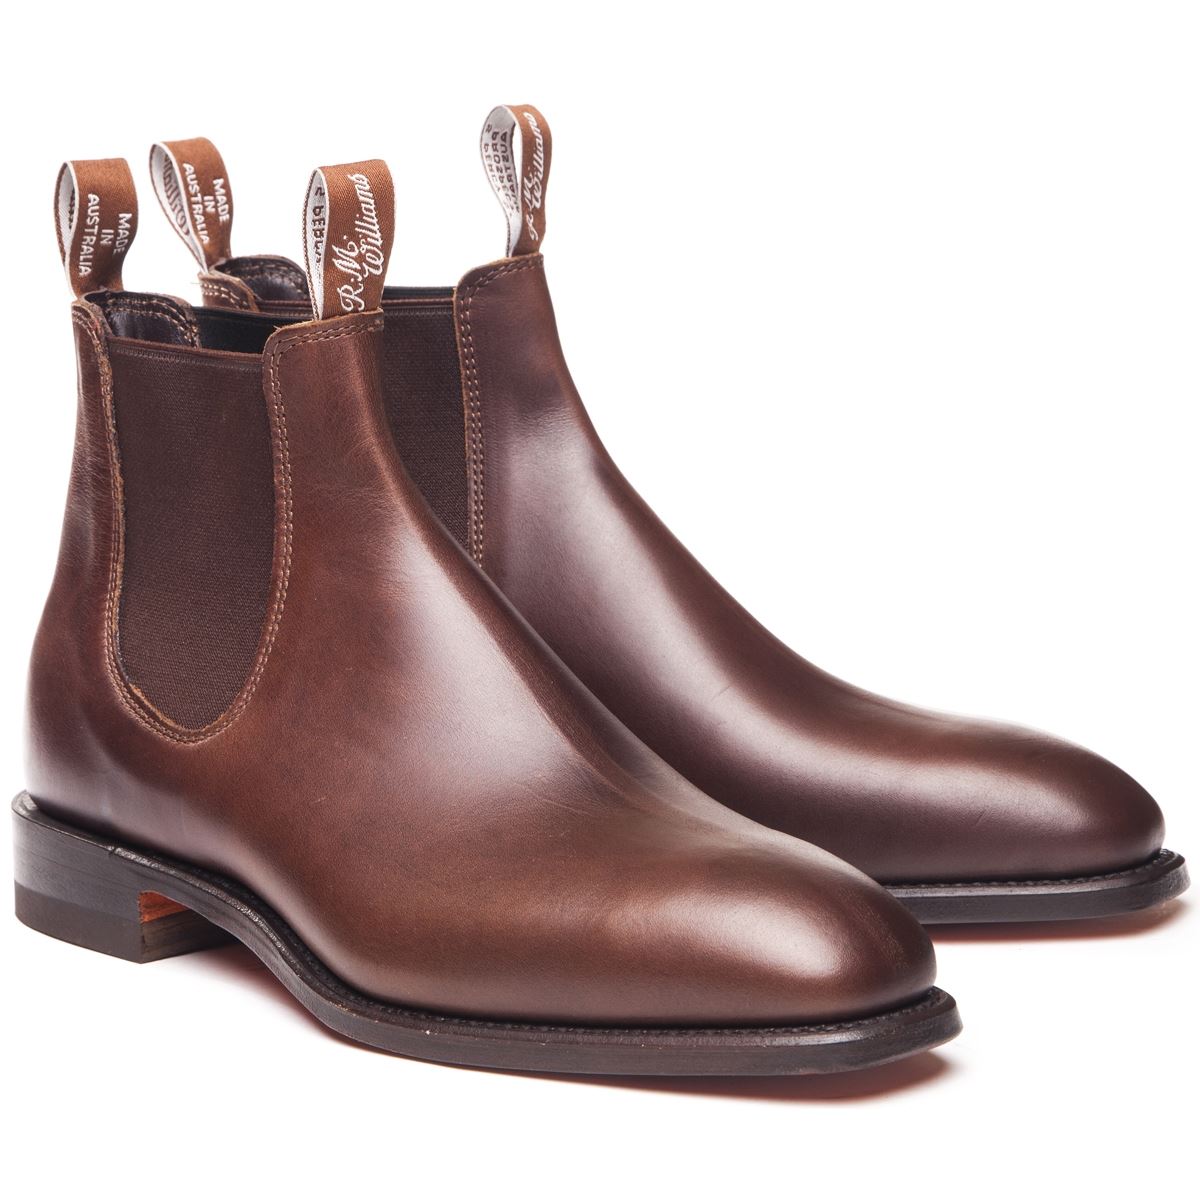 What leather are the Comfort Craftsman boots made from?